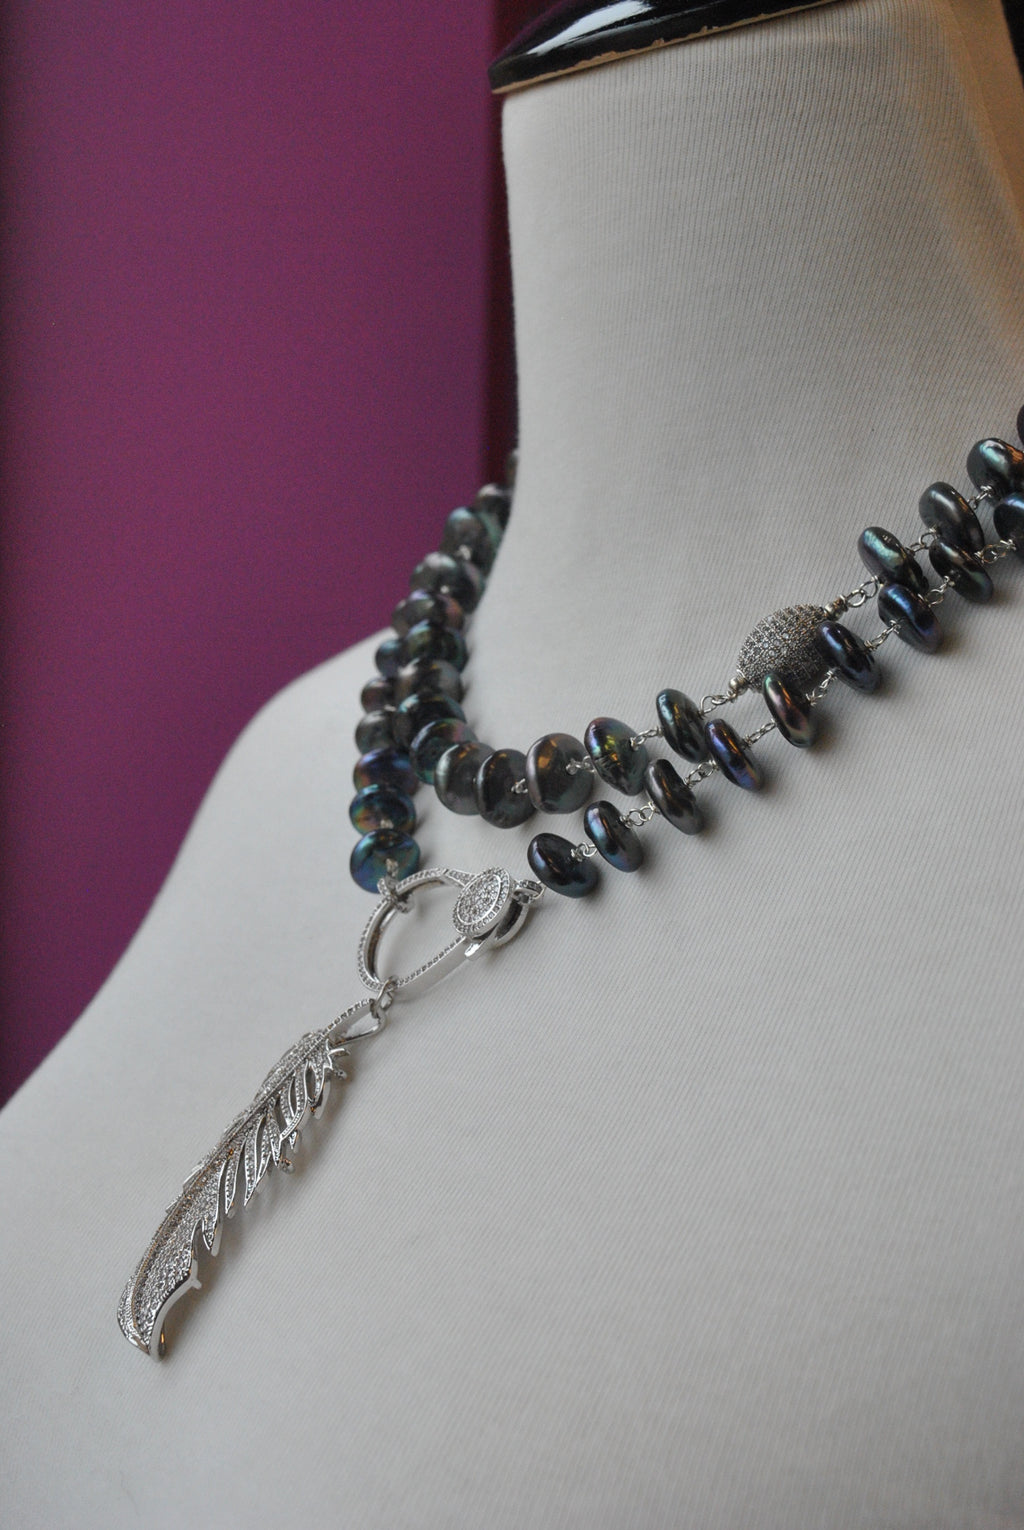 PEACOCK FRESHWATER PEARLS LONG STATEMENT NECKLACE WITH FEATHER PENDANT